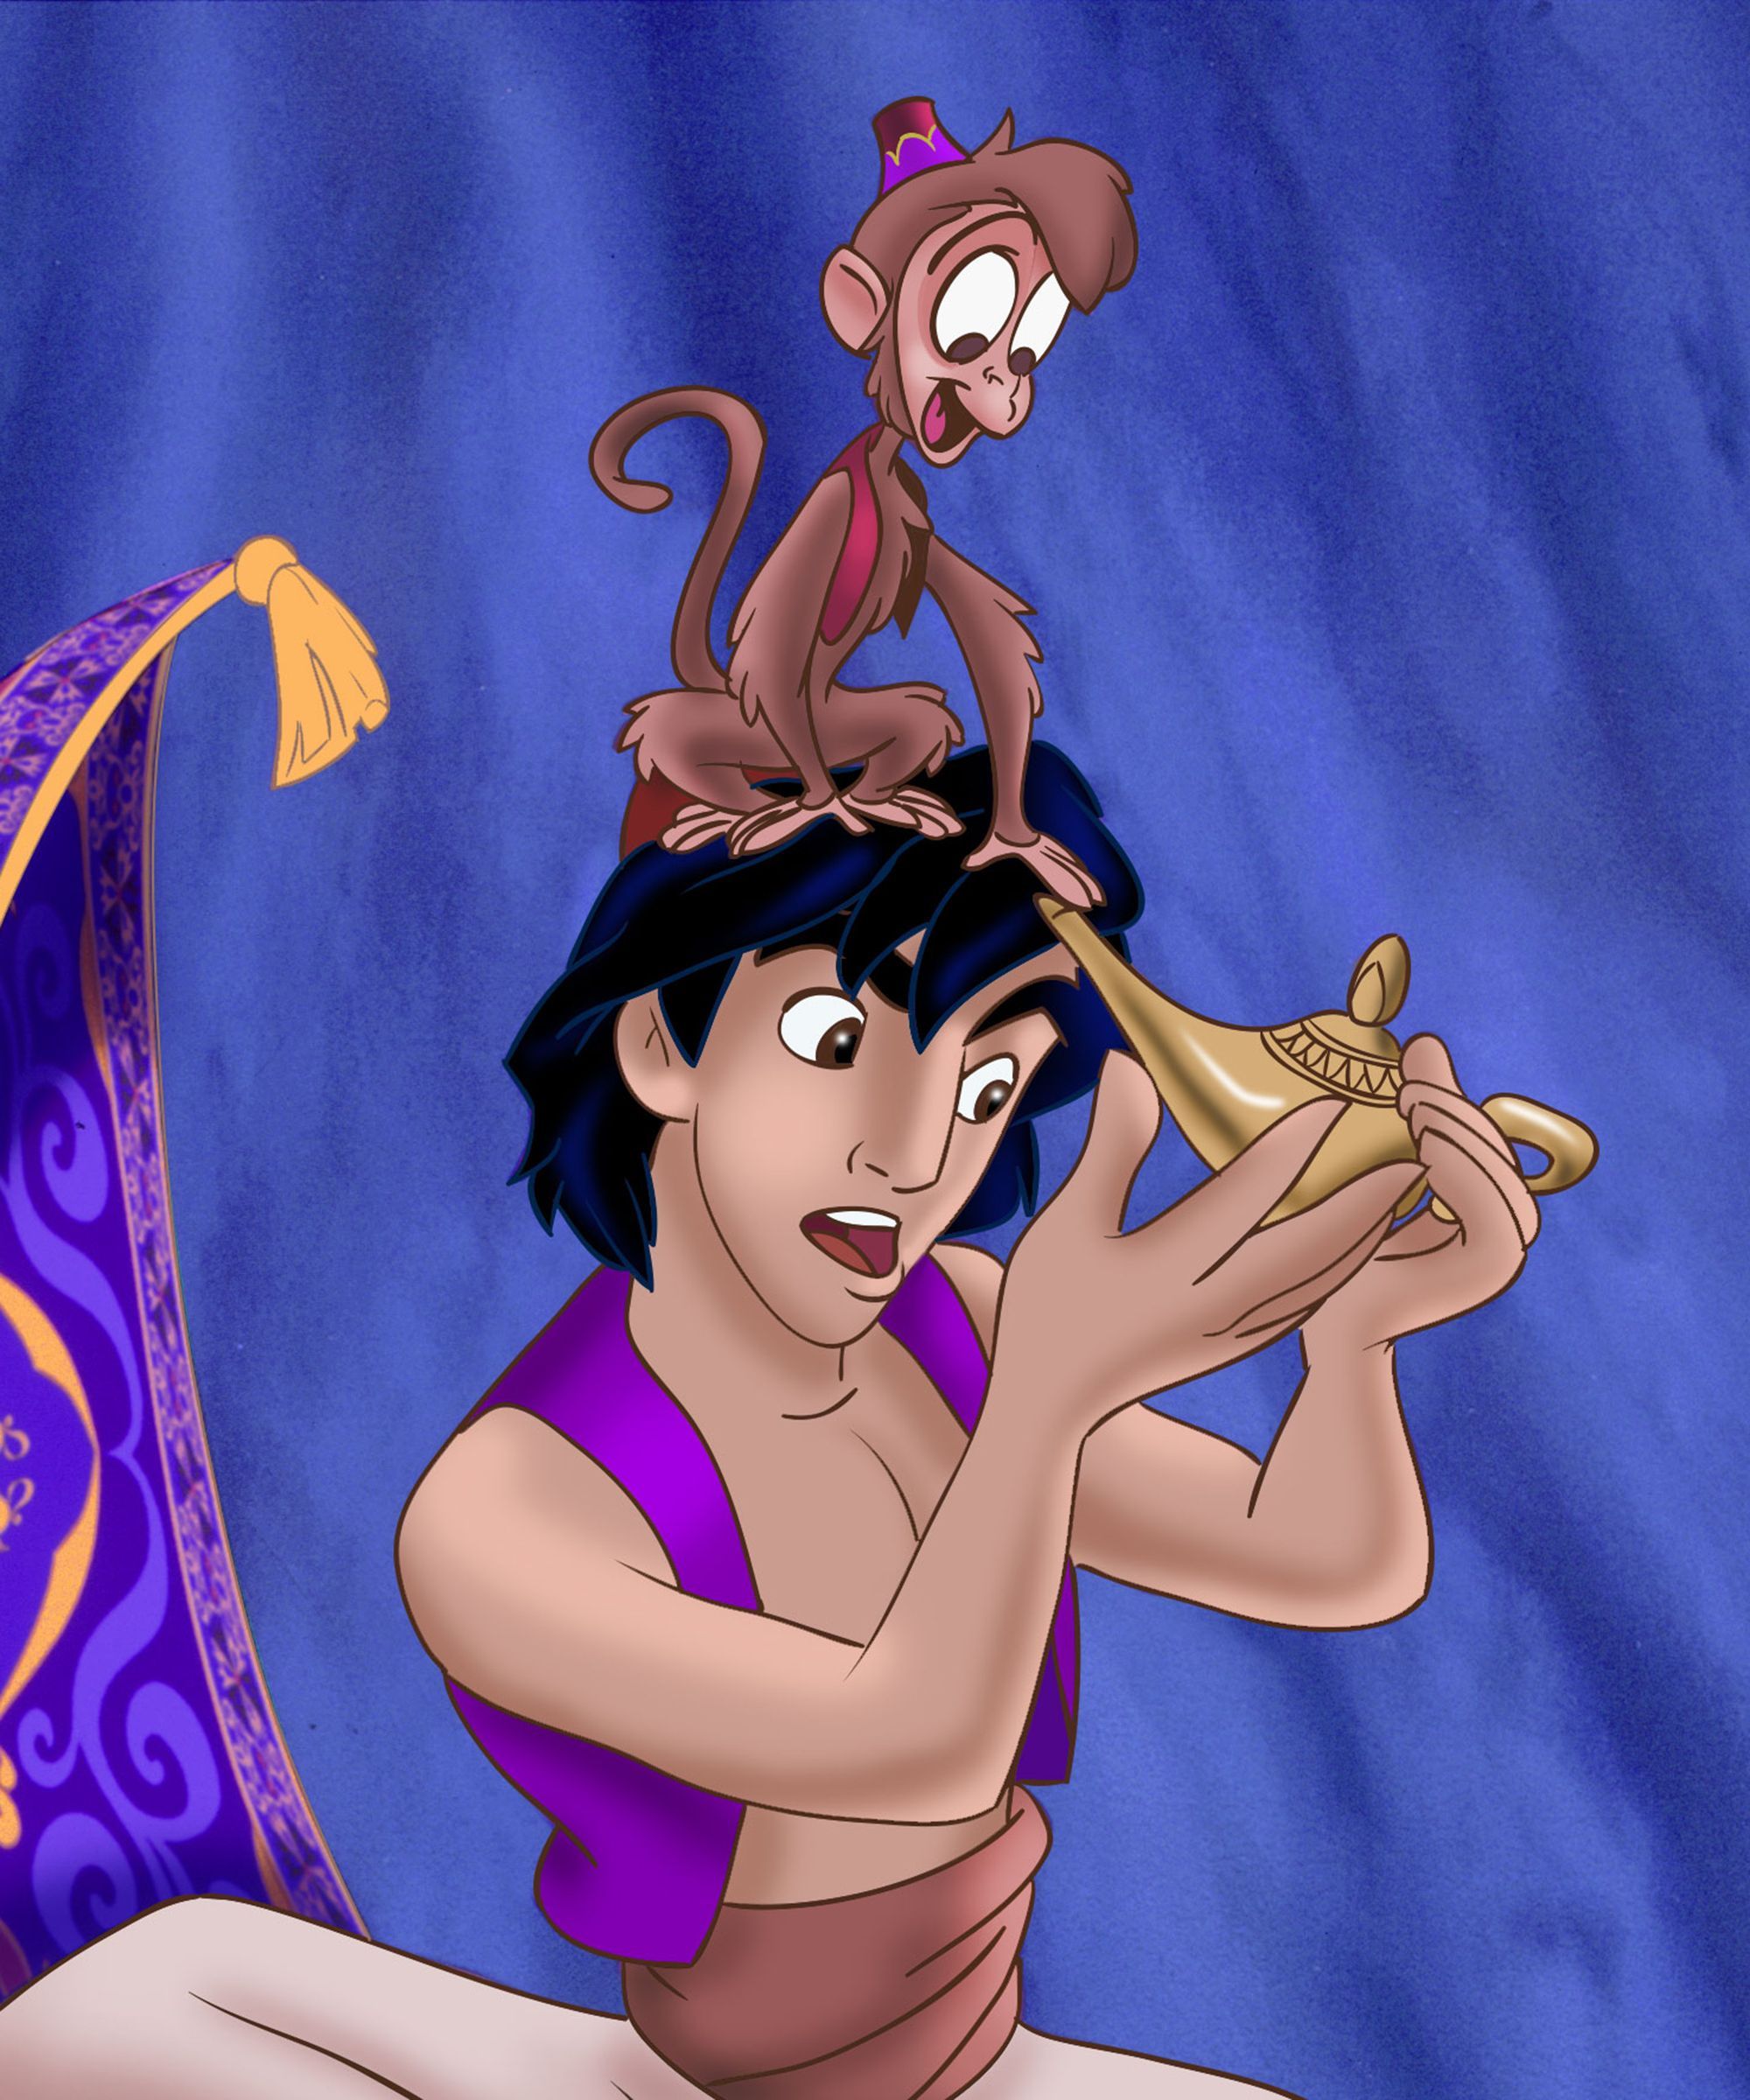 “Aladdin” Makes Some Seriously Necessary Changes To The Original Story